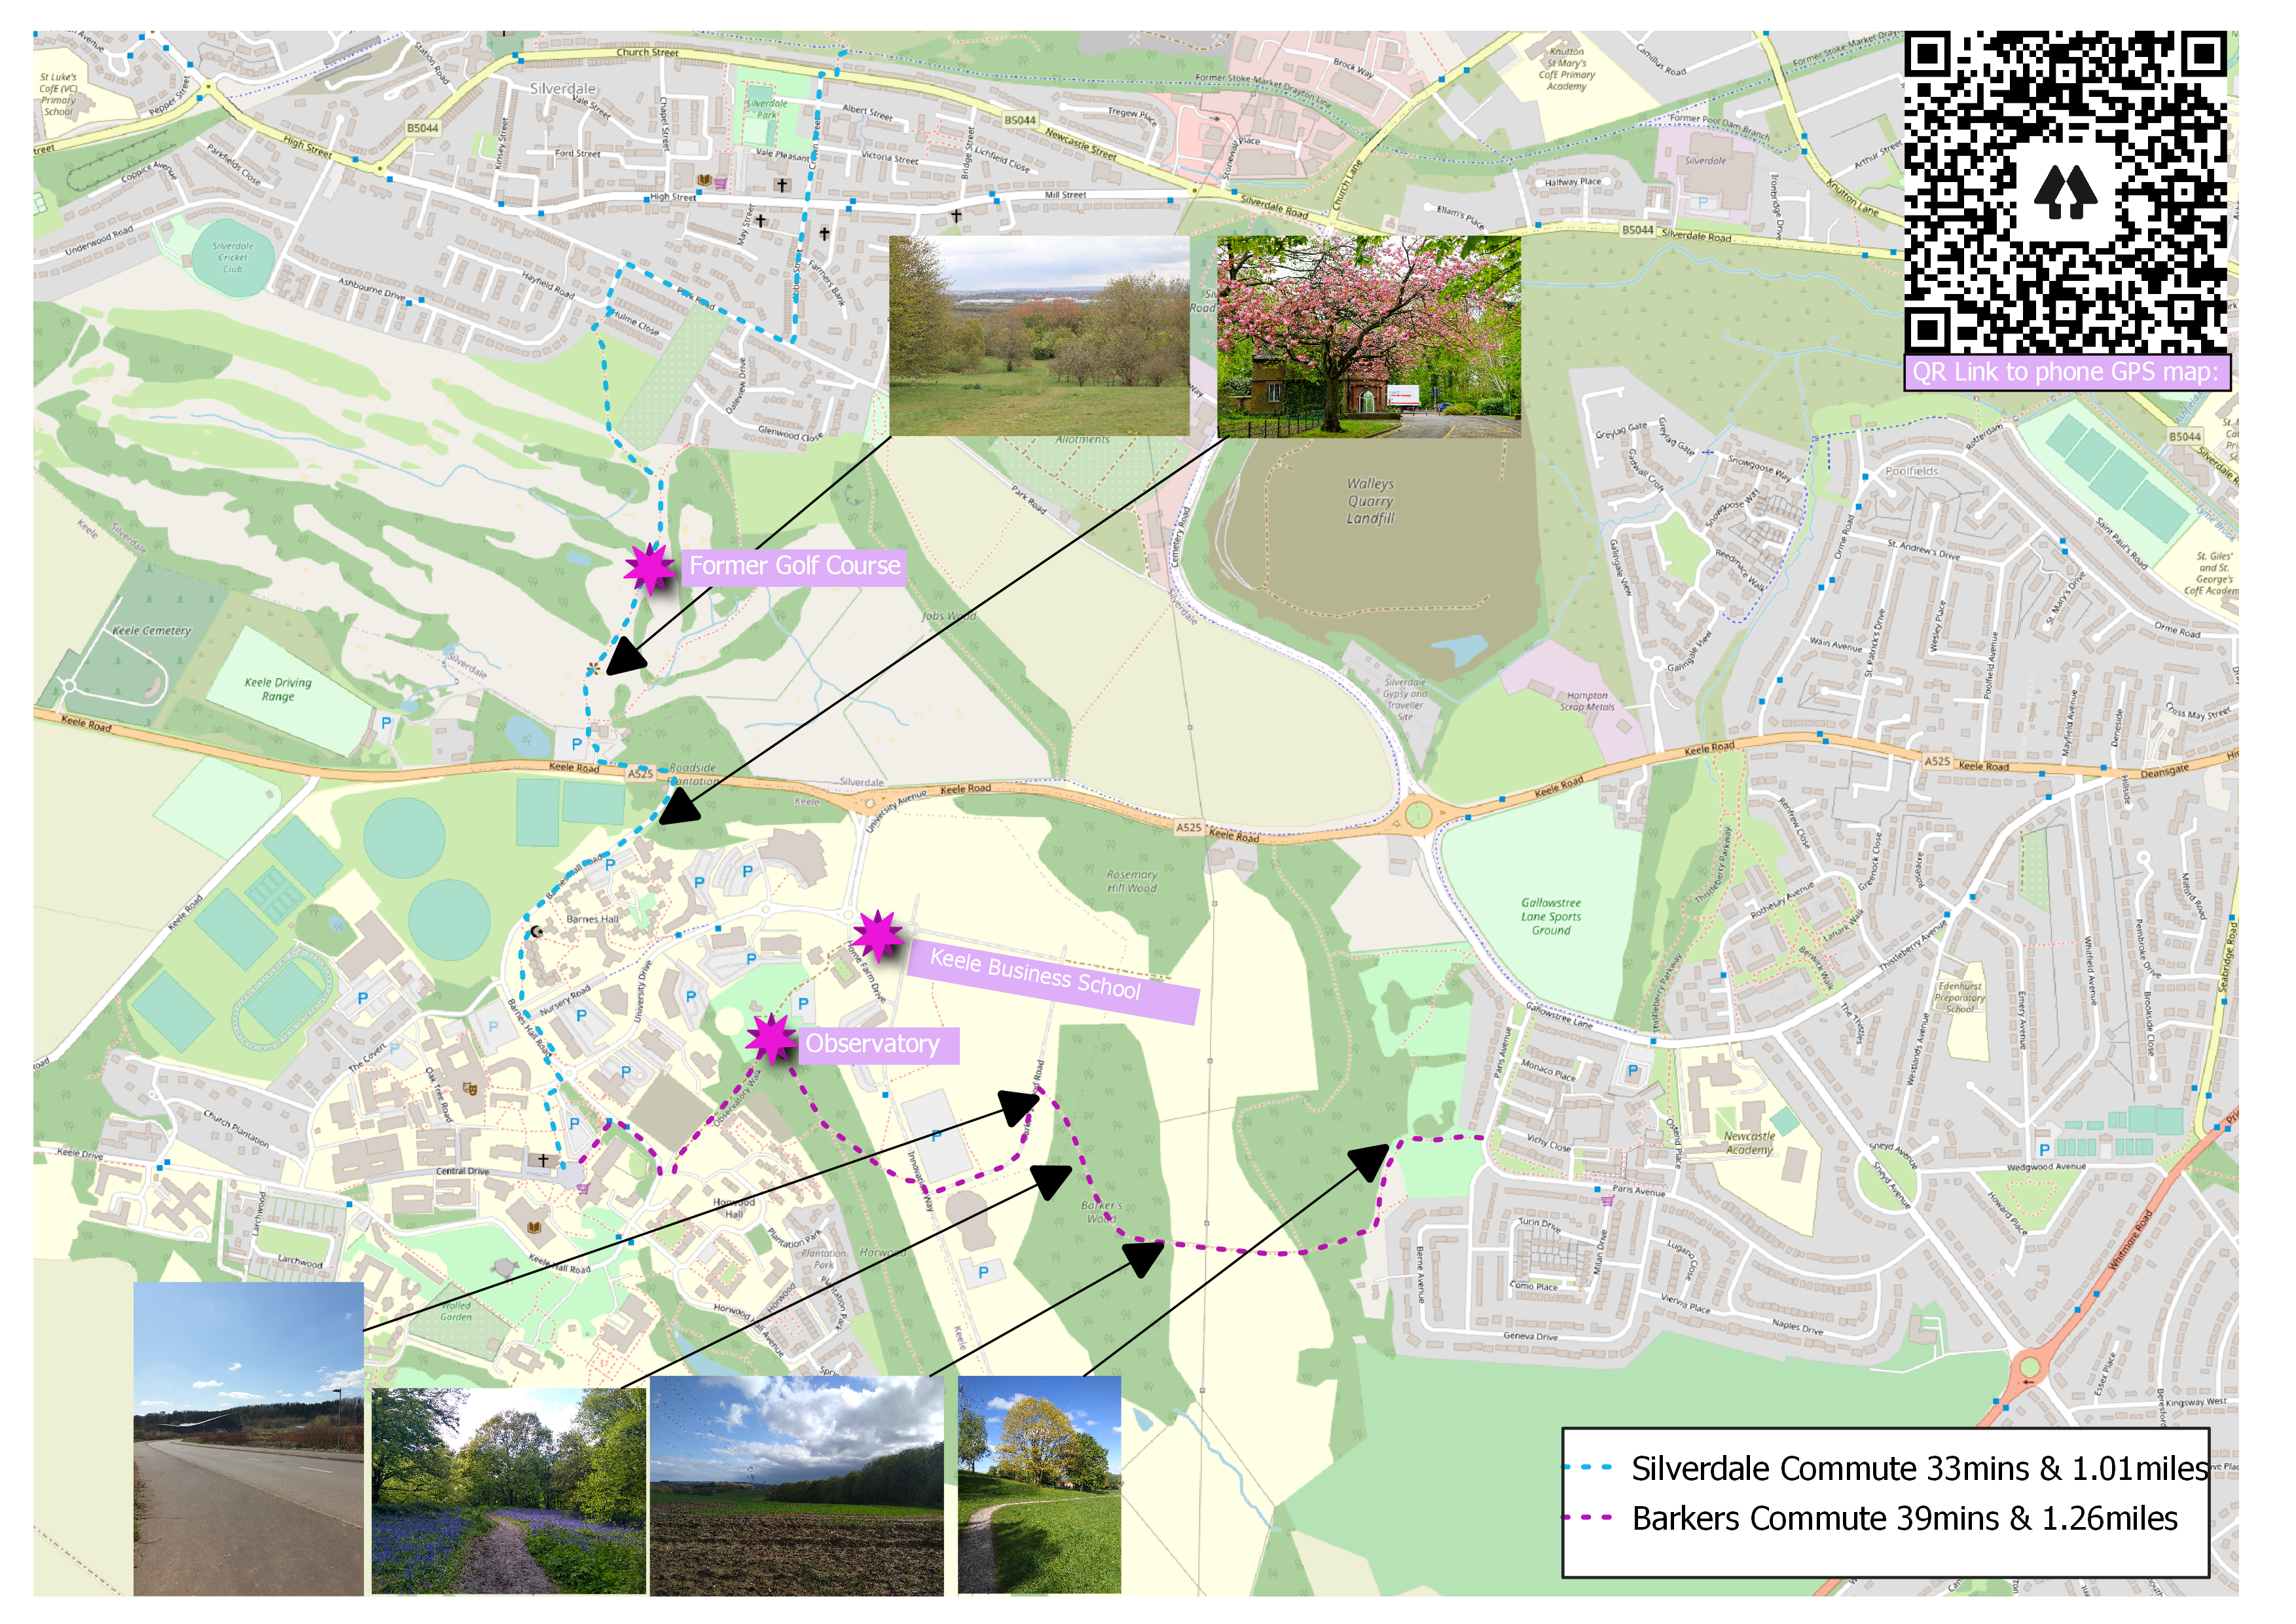 A map showing two local walking commutes to campus from westlands and silverdale 